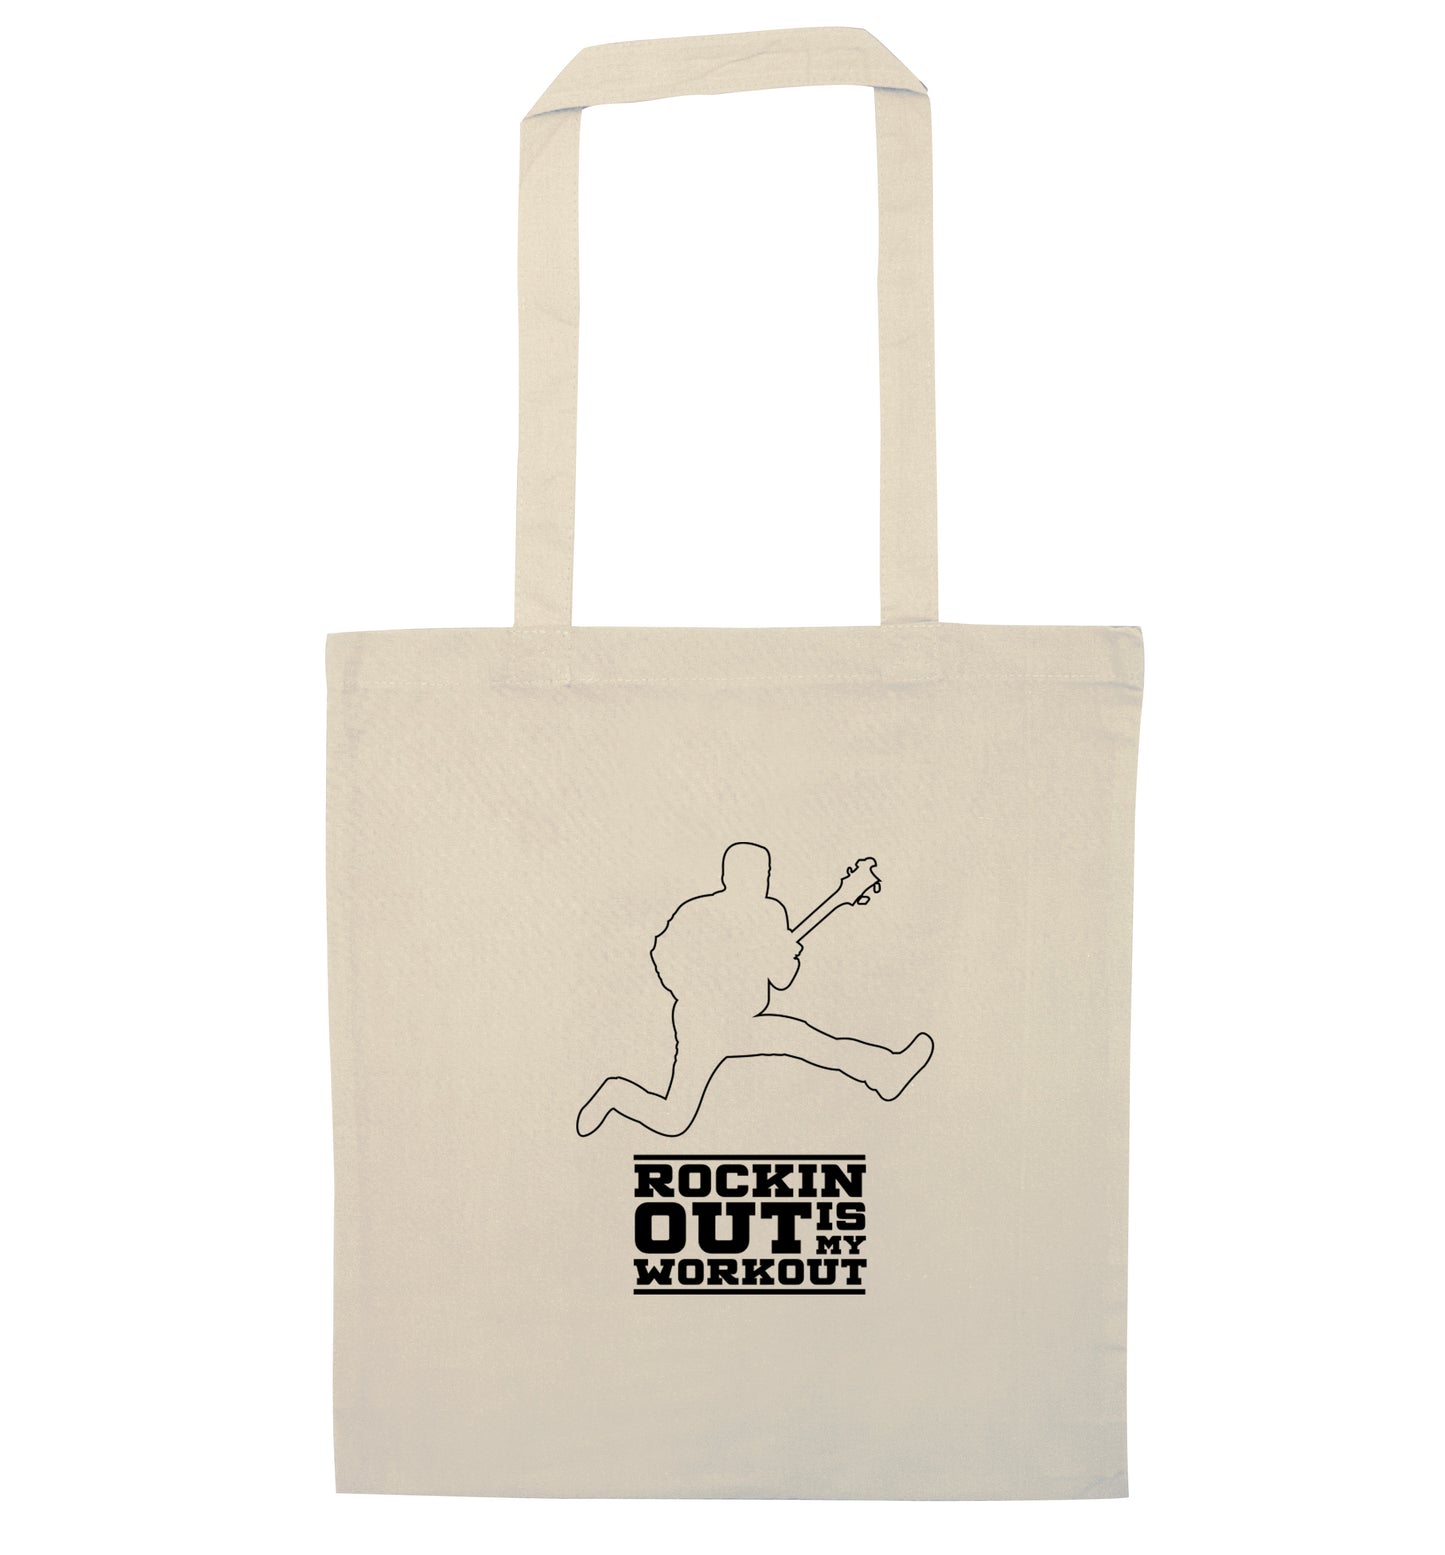 Rockin out is my workout 2 natural tote bag